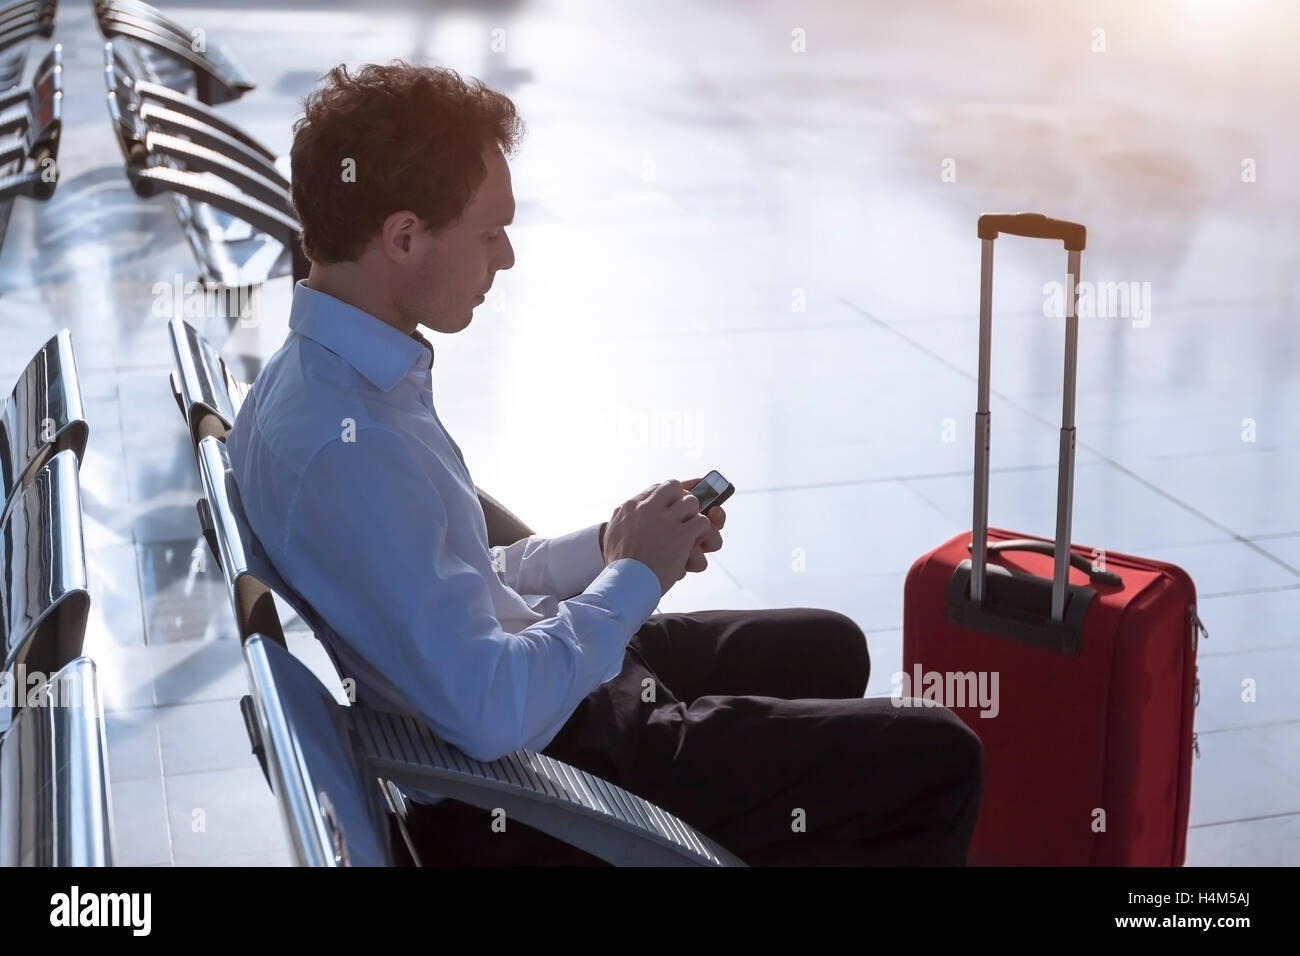 Using wireless internet at airport Stock Photo